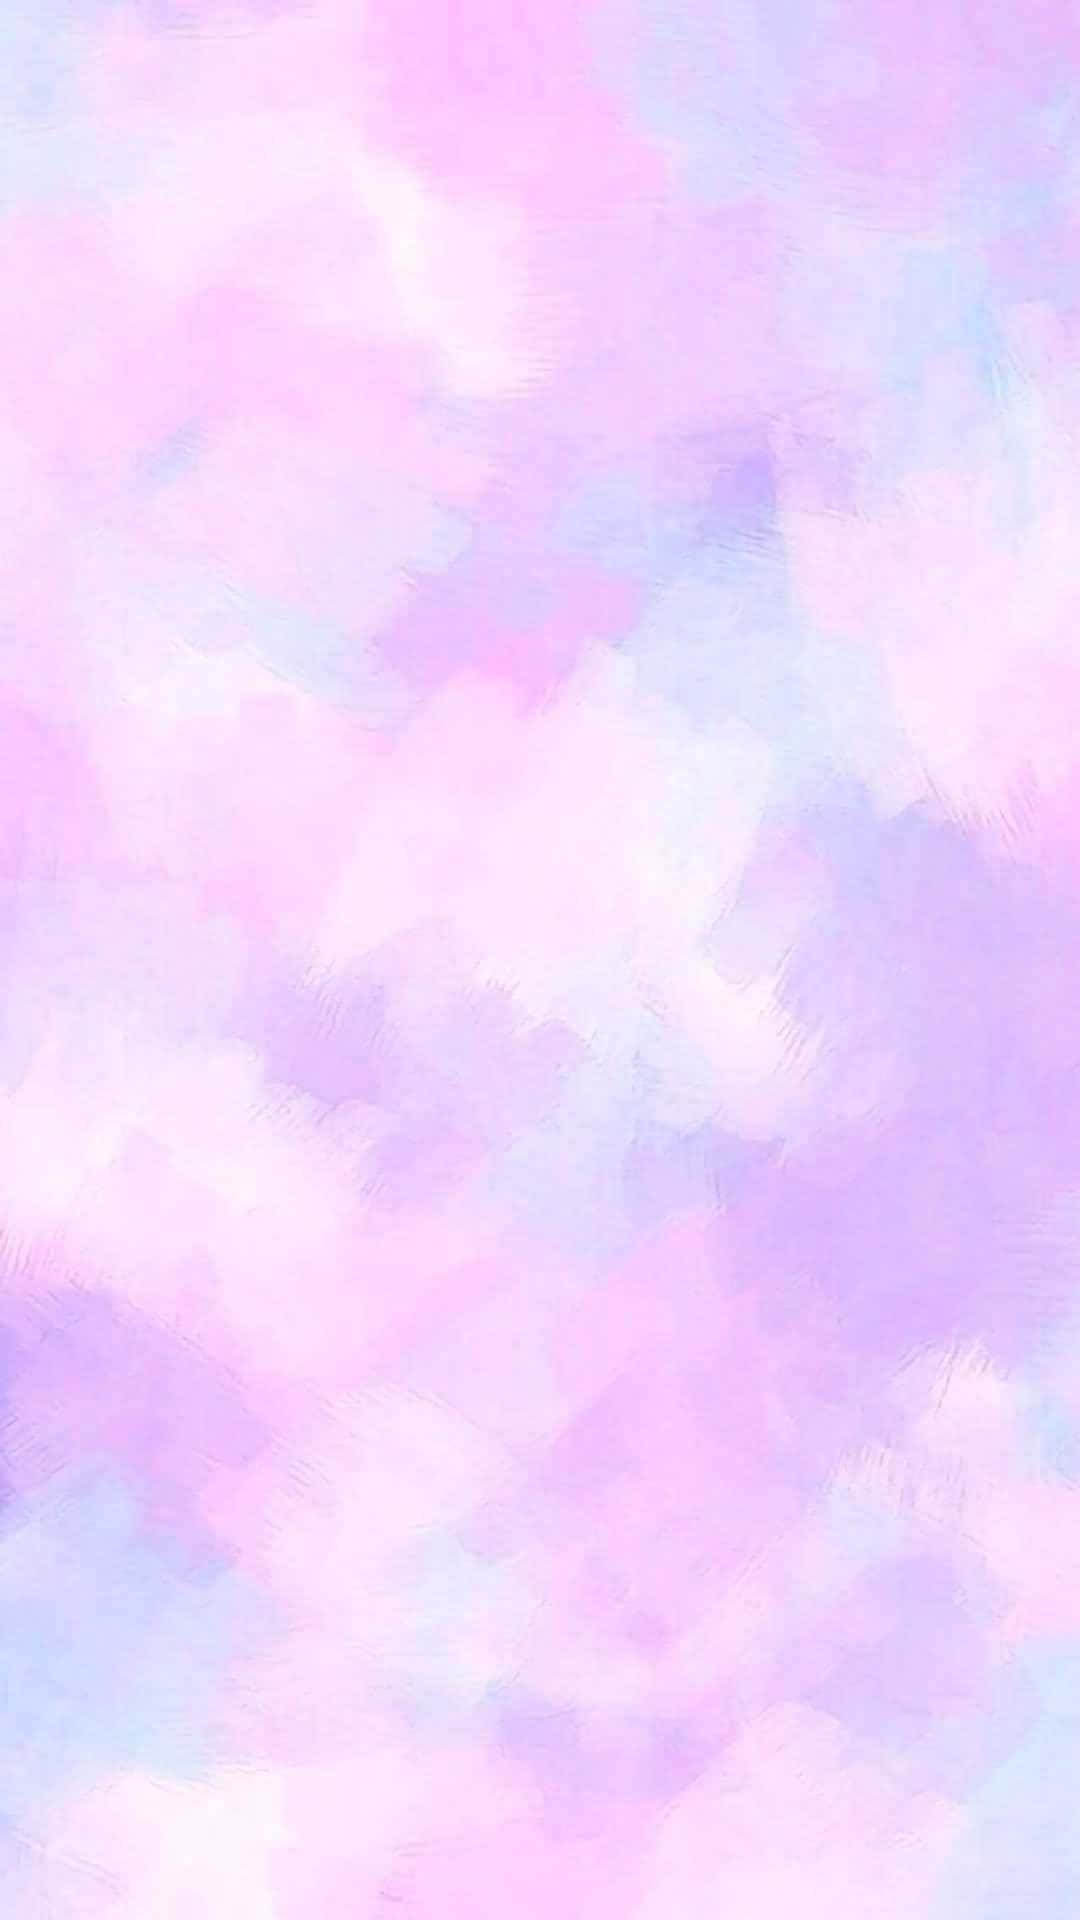 A dreamy gradient of purple and pink